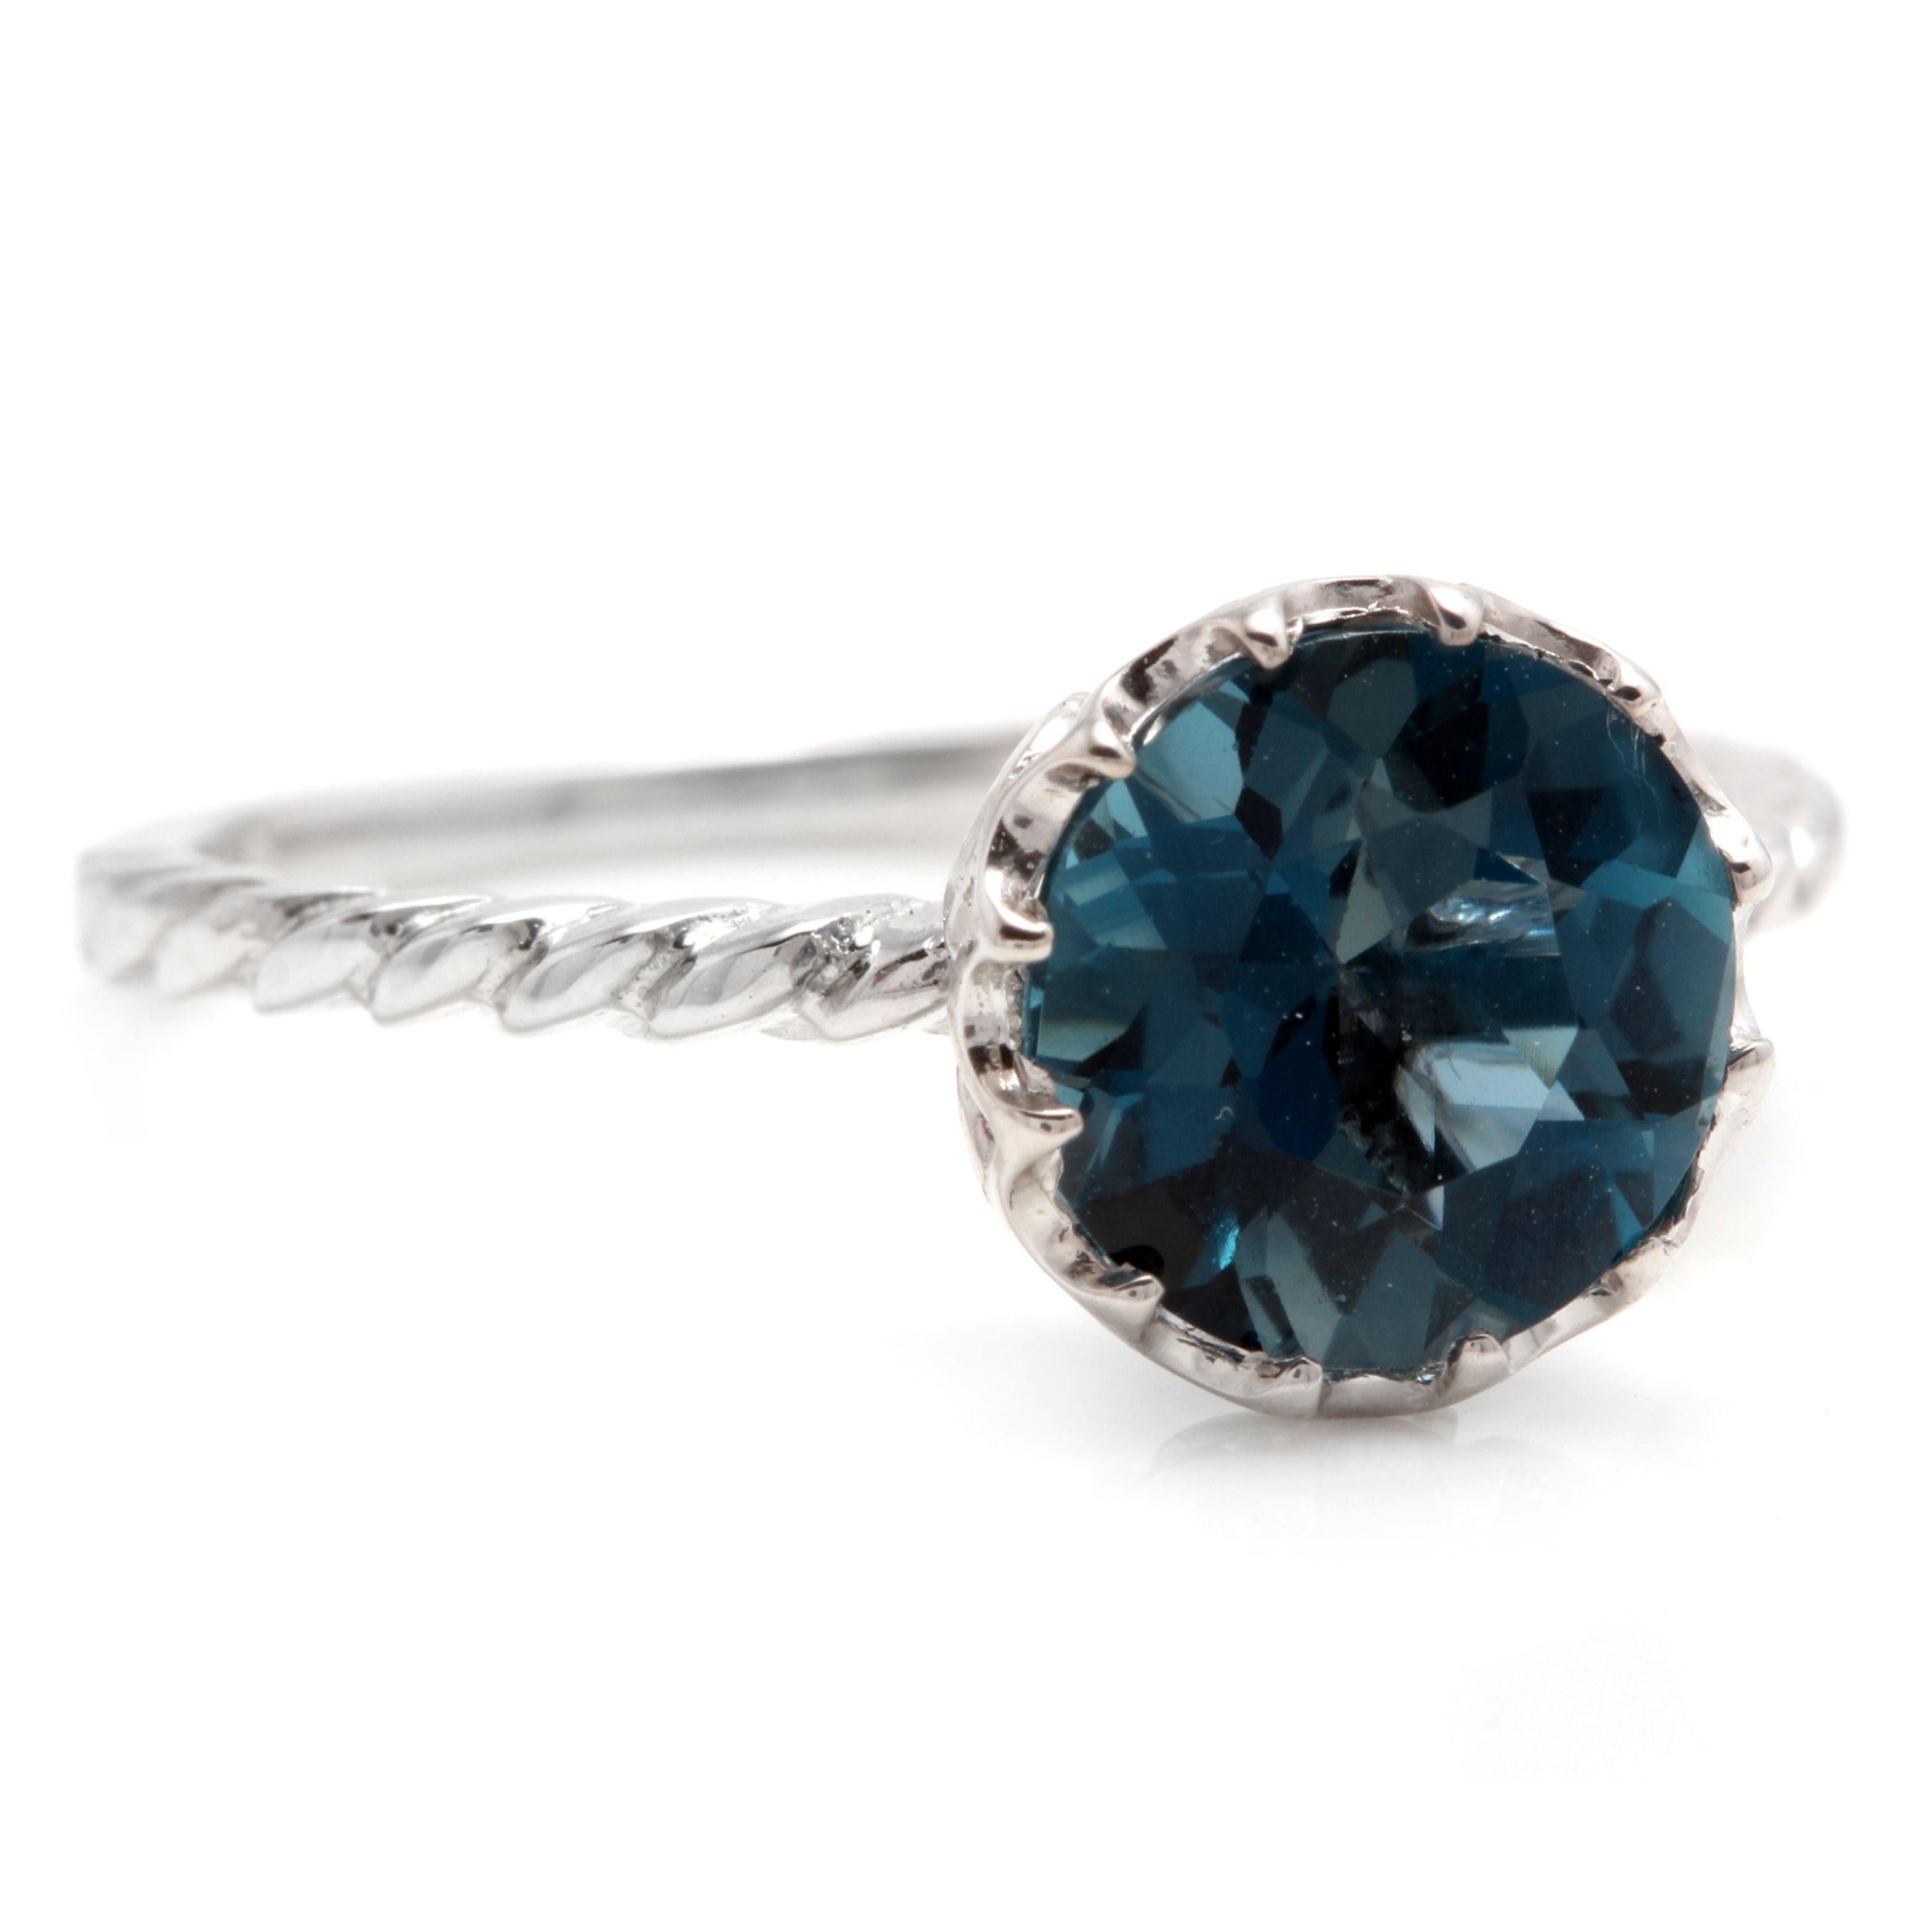 2.00 Carats Natural London Blue Topaz 14K Solid White Gold Ring

Total Natural Round Shaped Topaz Weight is: Approx. 2.00 Carats

Topaz Measures: Approx. 8.00mm

Ring size: 6.25 (we offer free re-sizing upon request)

Ring total weight: Approx. 2.1